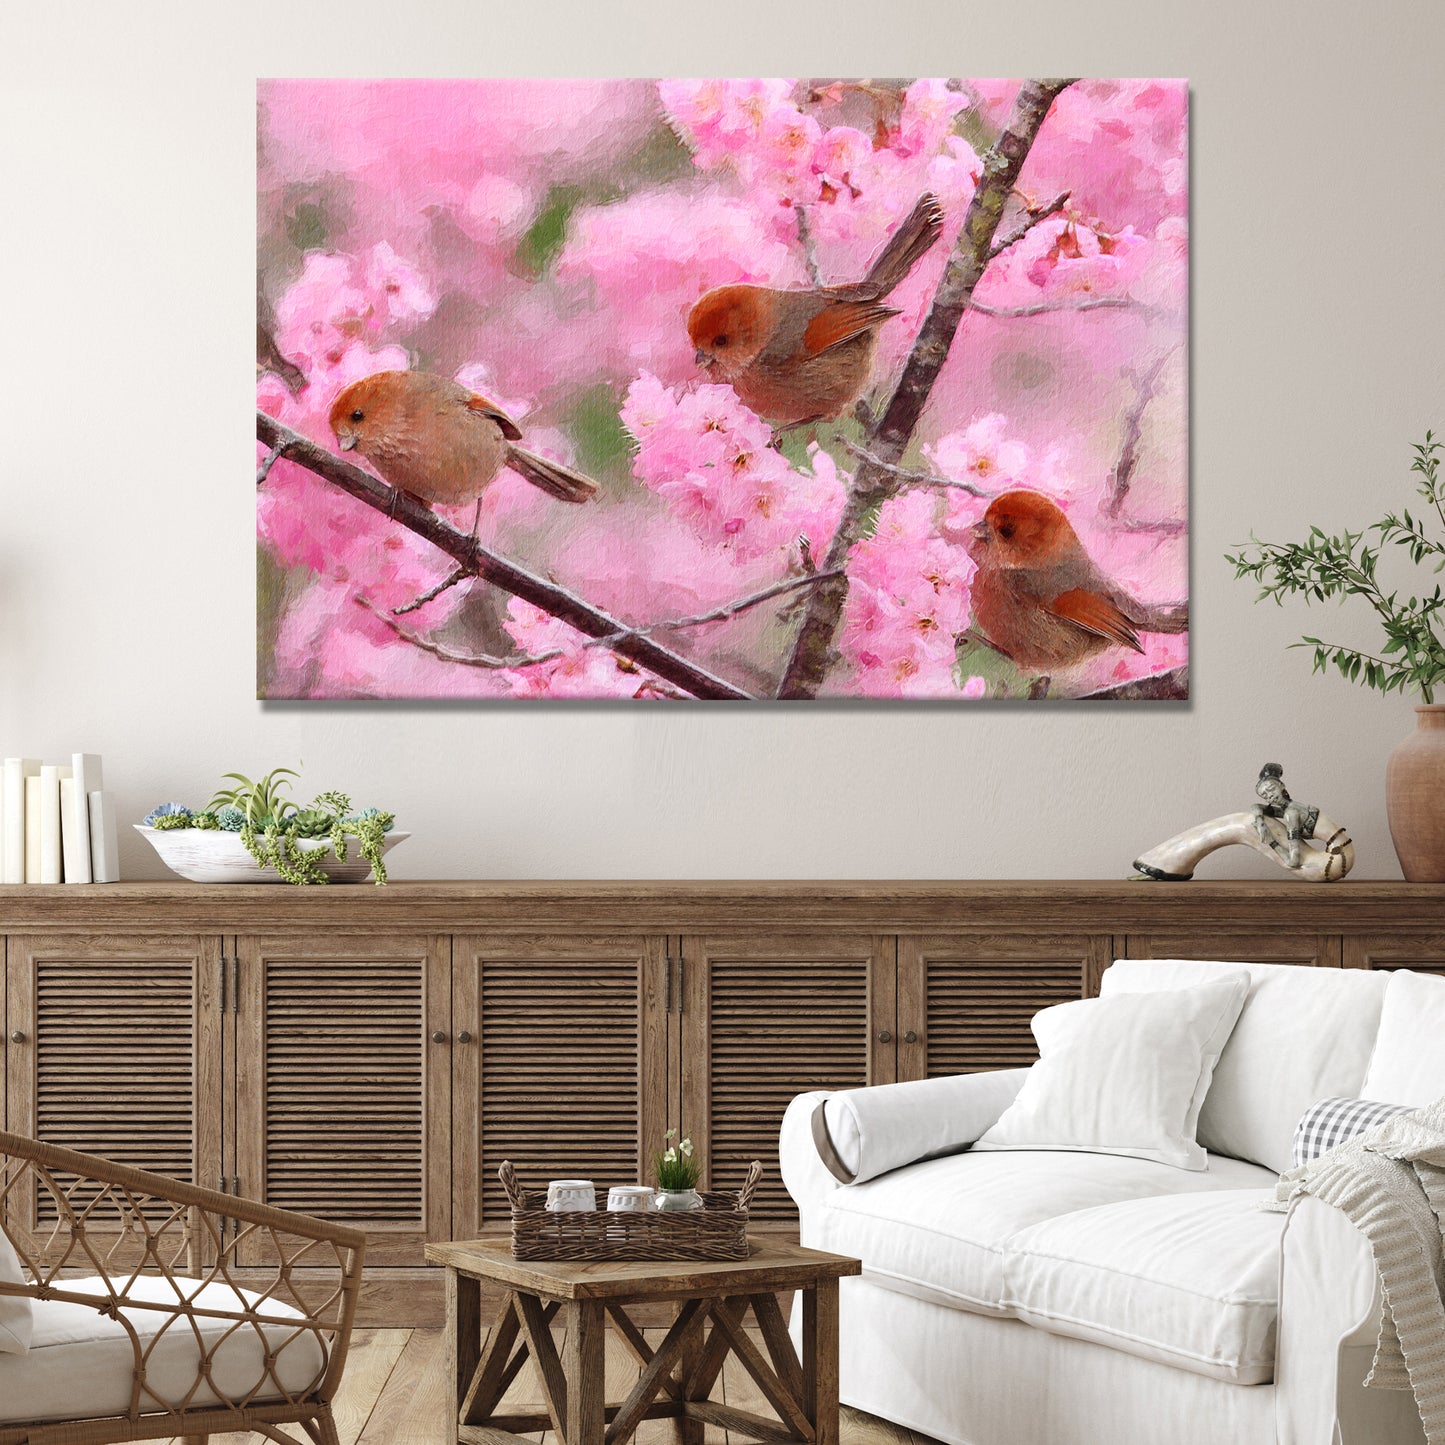 Birds on Cherry Blossom Tree Painting Canvas Wall Art - Image by Tailored Canvases